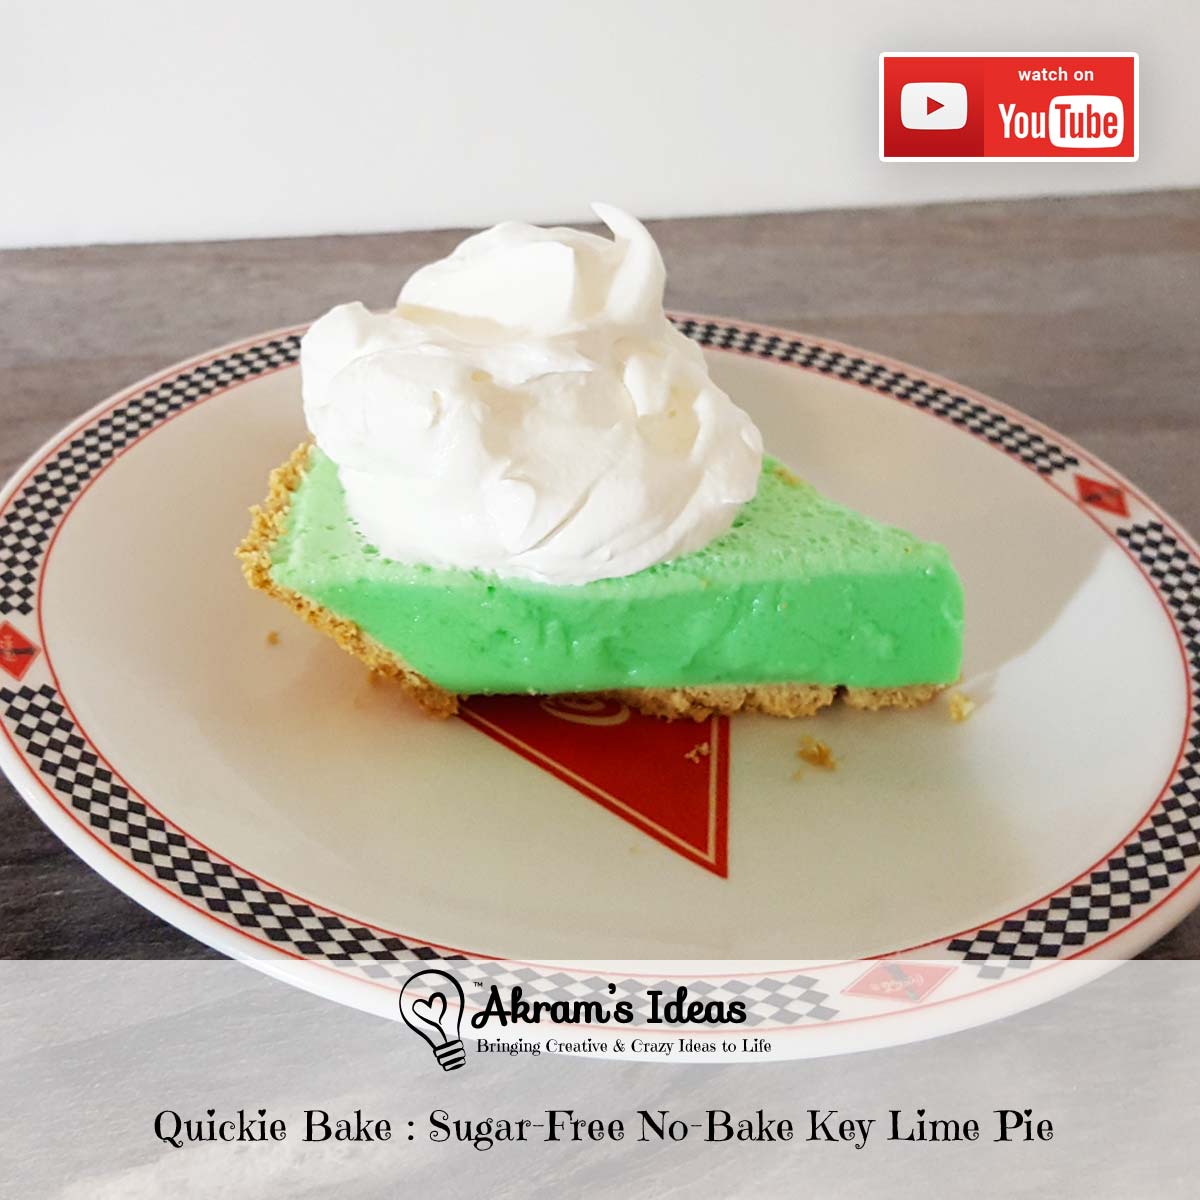 Learn how to make this easy sugar-free no-bake Key Lime Pie with fresh lime juice and lime Jell-O.